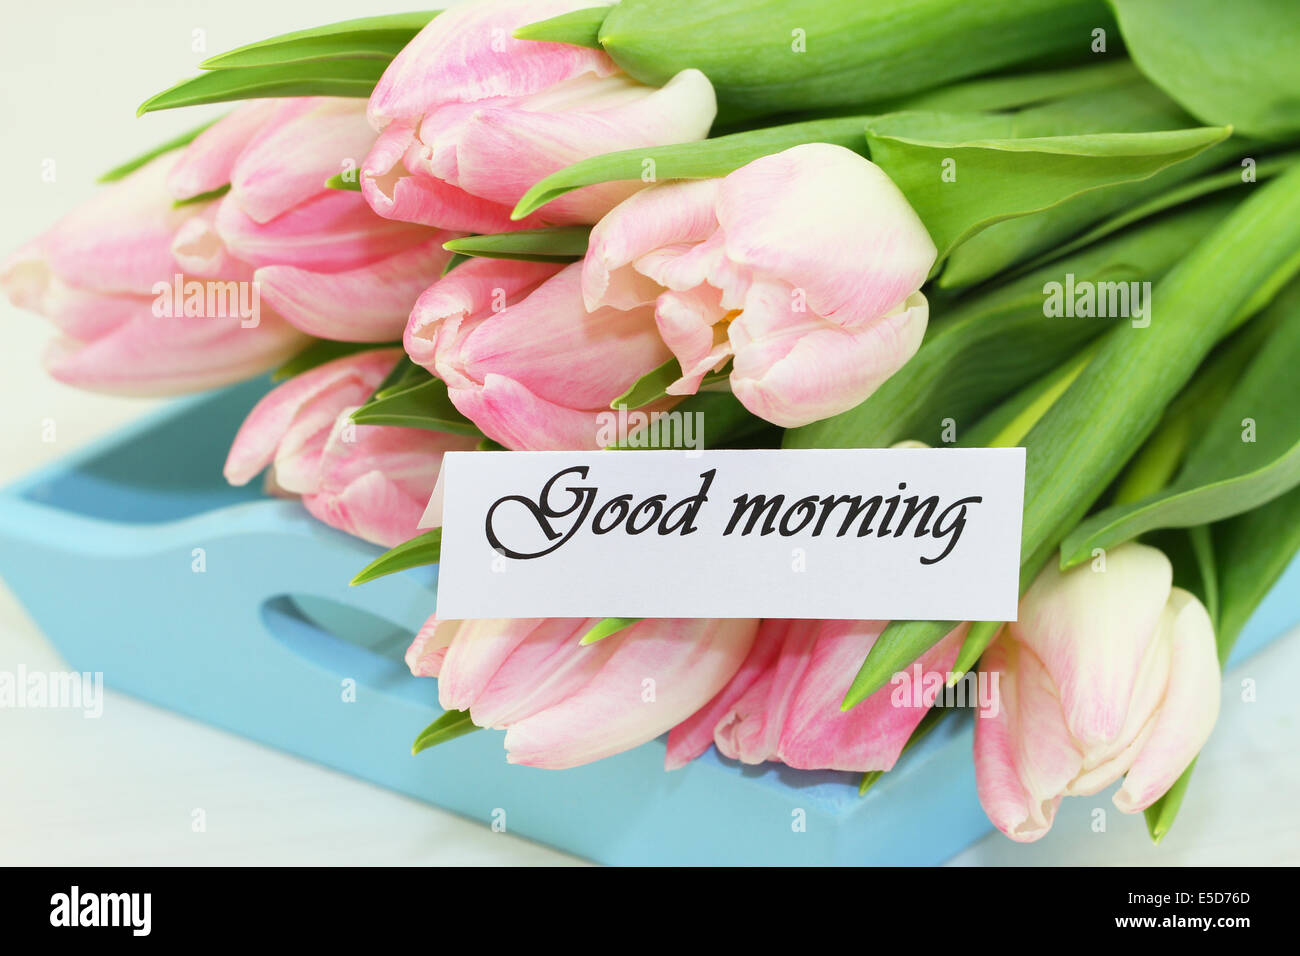 Good morning card with pink tulips Stock Photo - Alamy